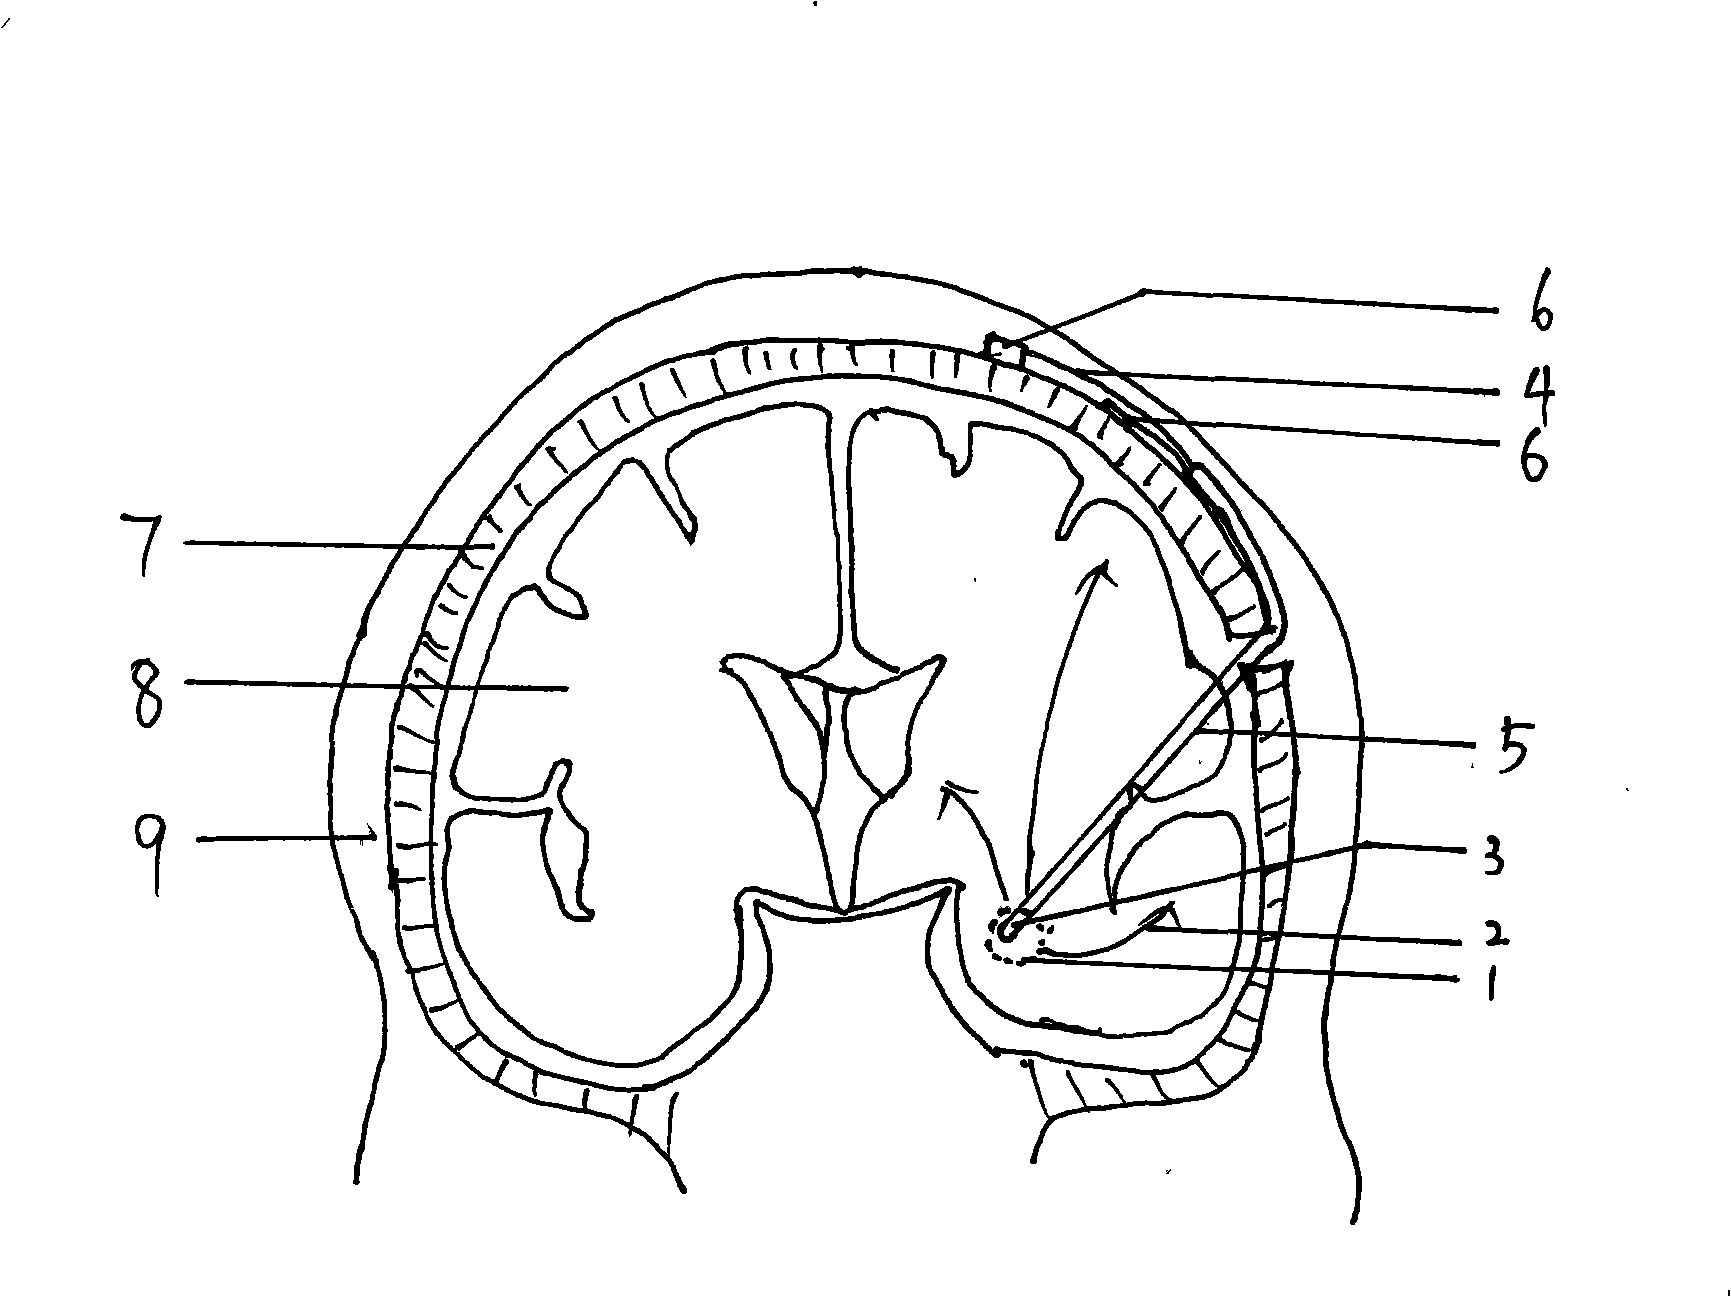 Deep brain epileptic discharge induction treatment method and equipment